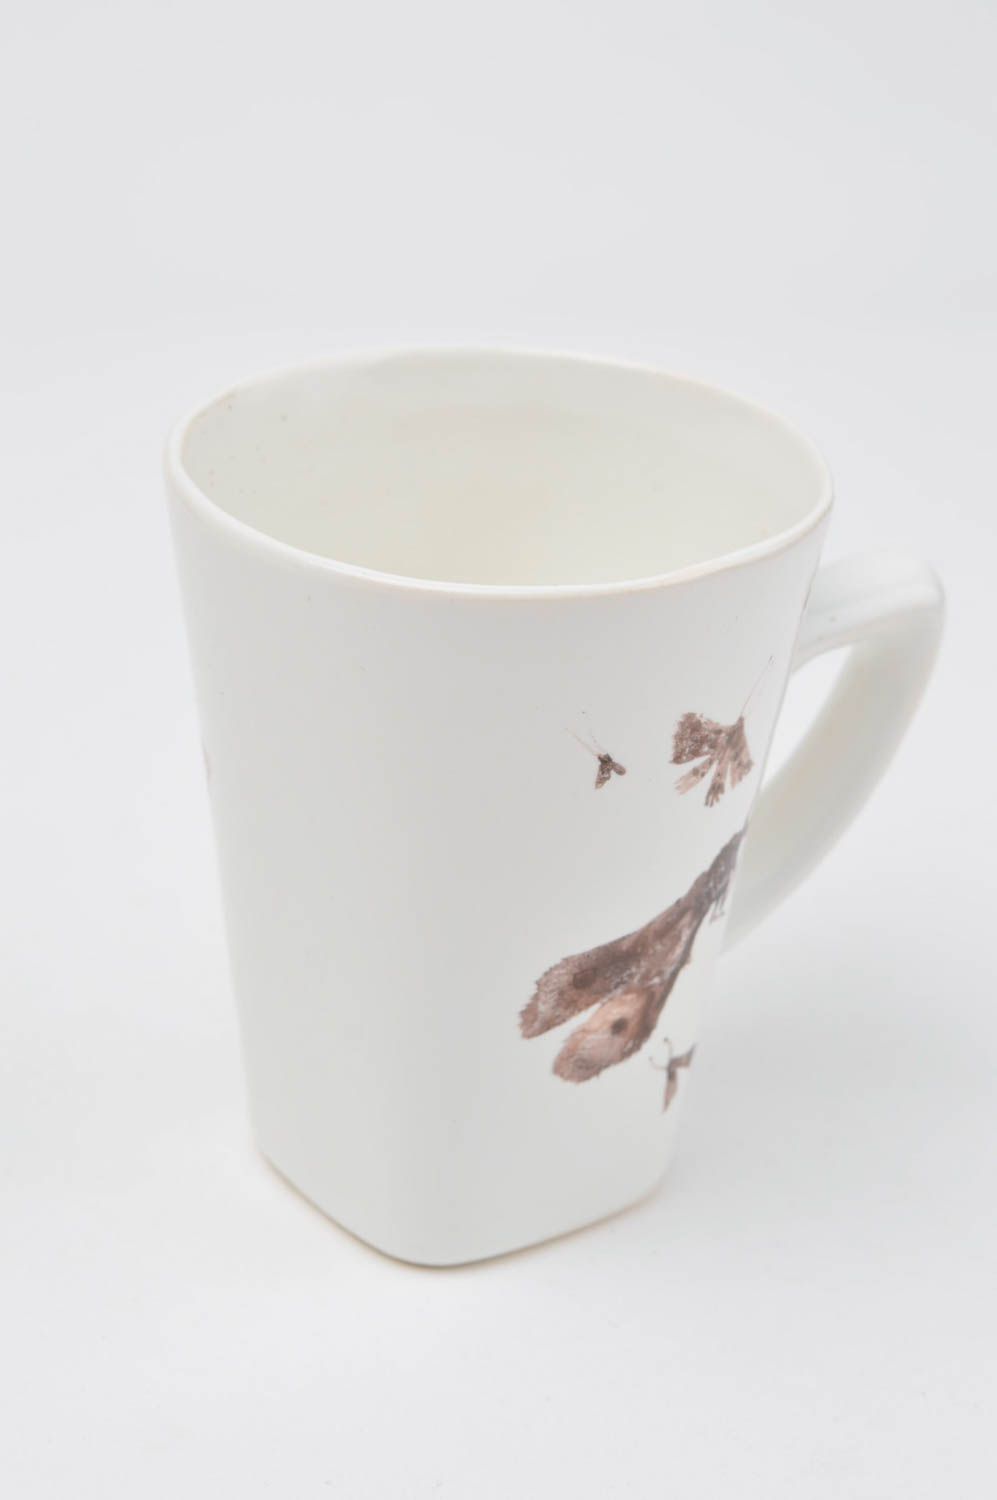 White porcelain teacup with handle and hand-painted pattern photo 2